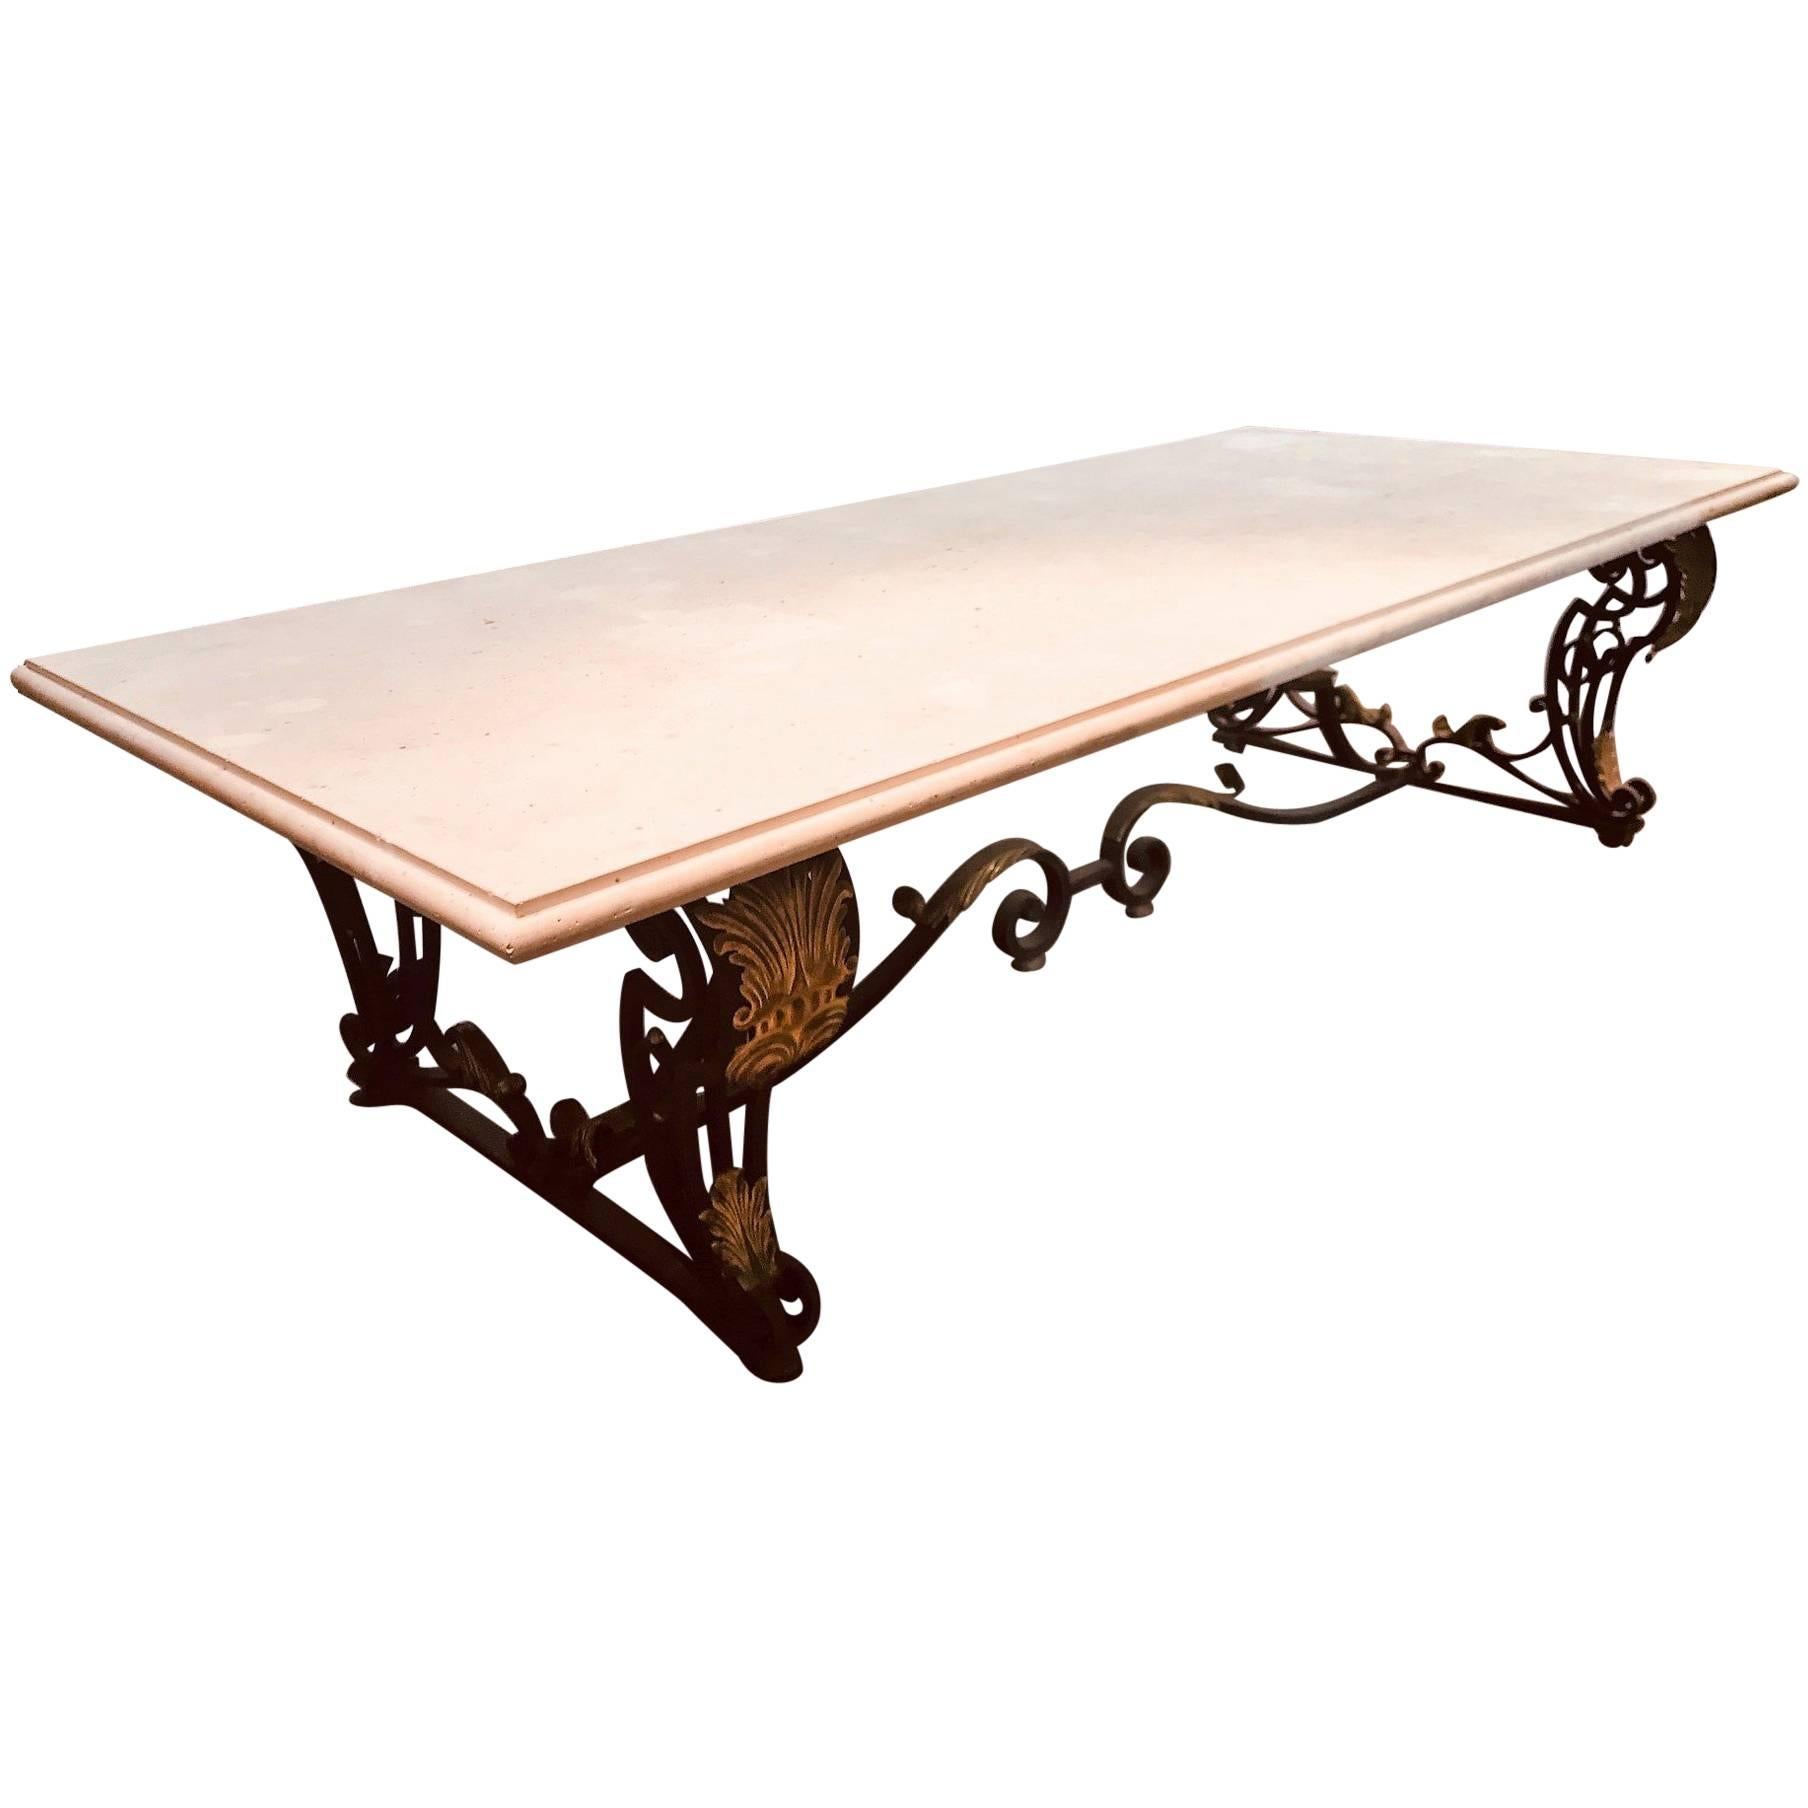 Large French Design Hand-Wrought Iron and Limestone Top Table